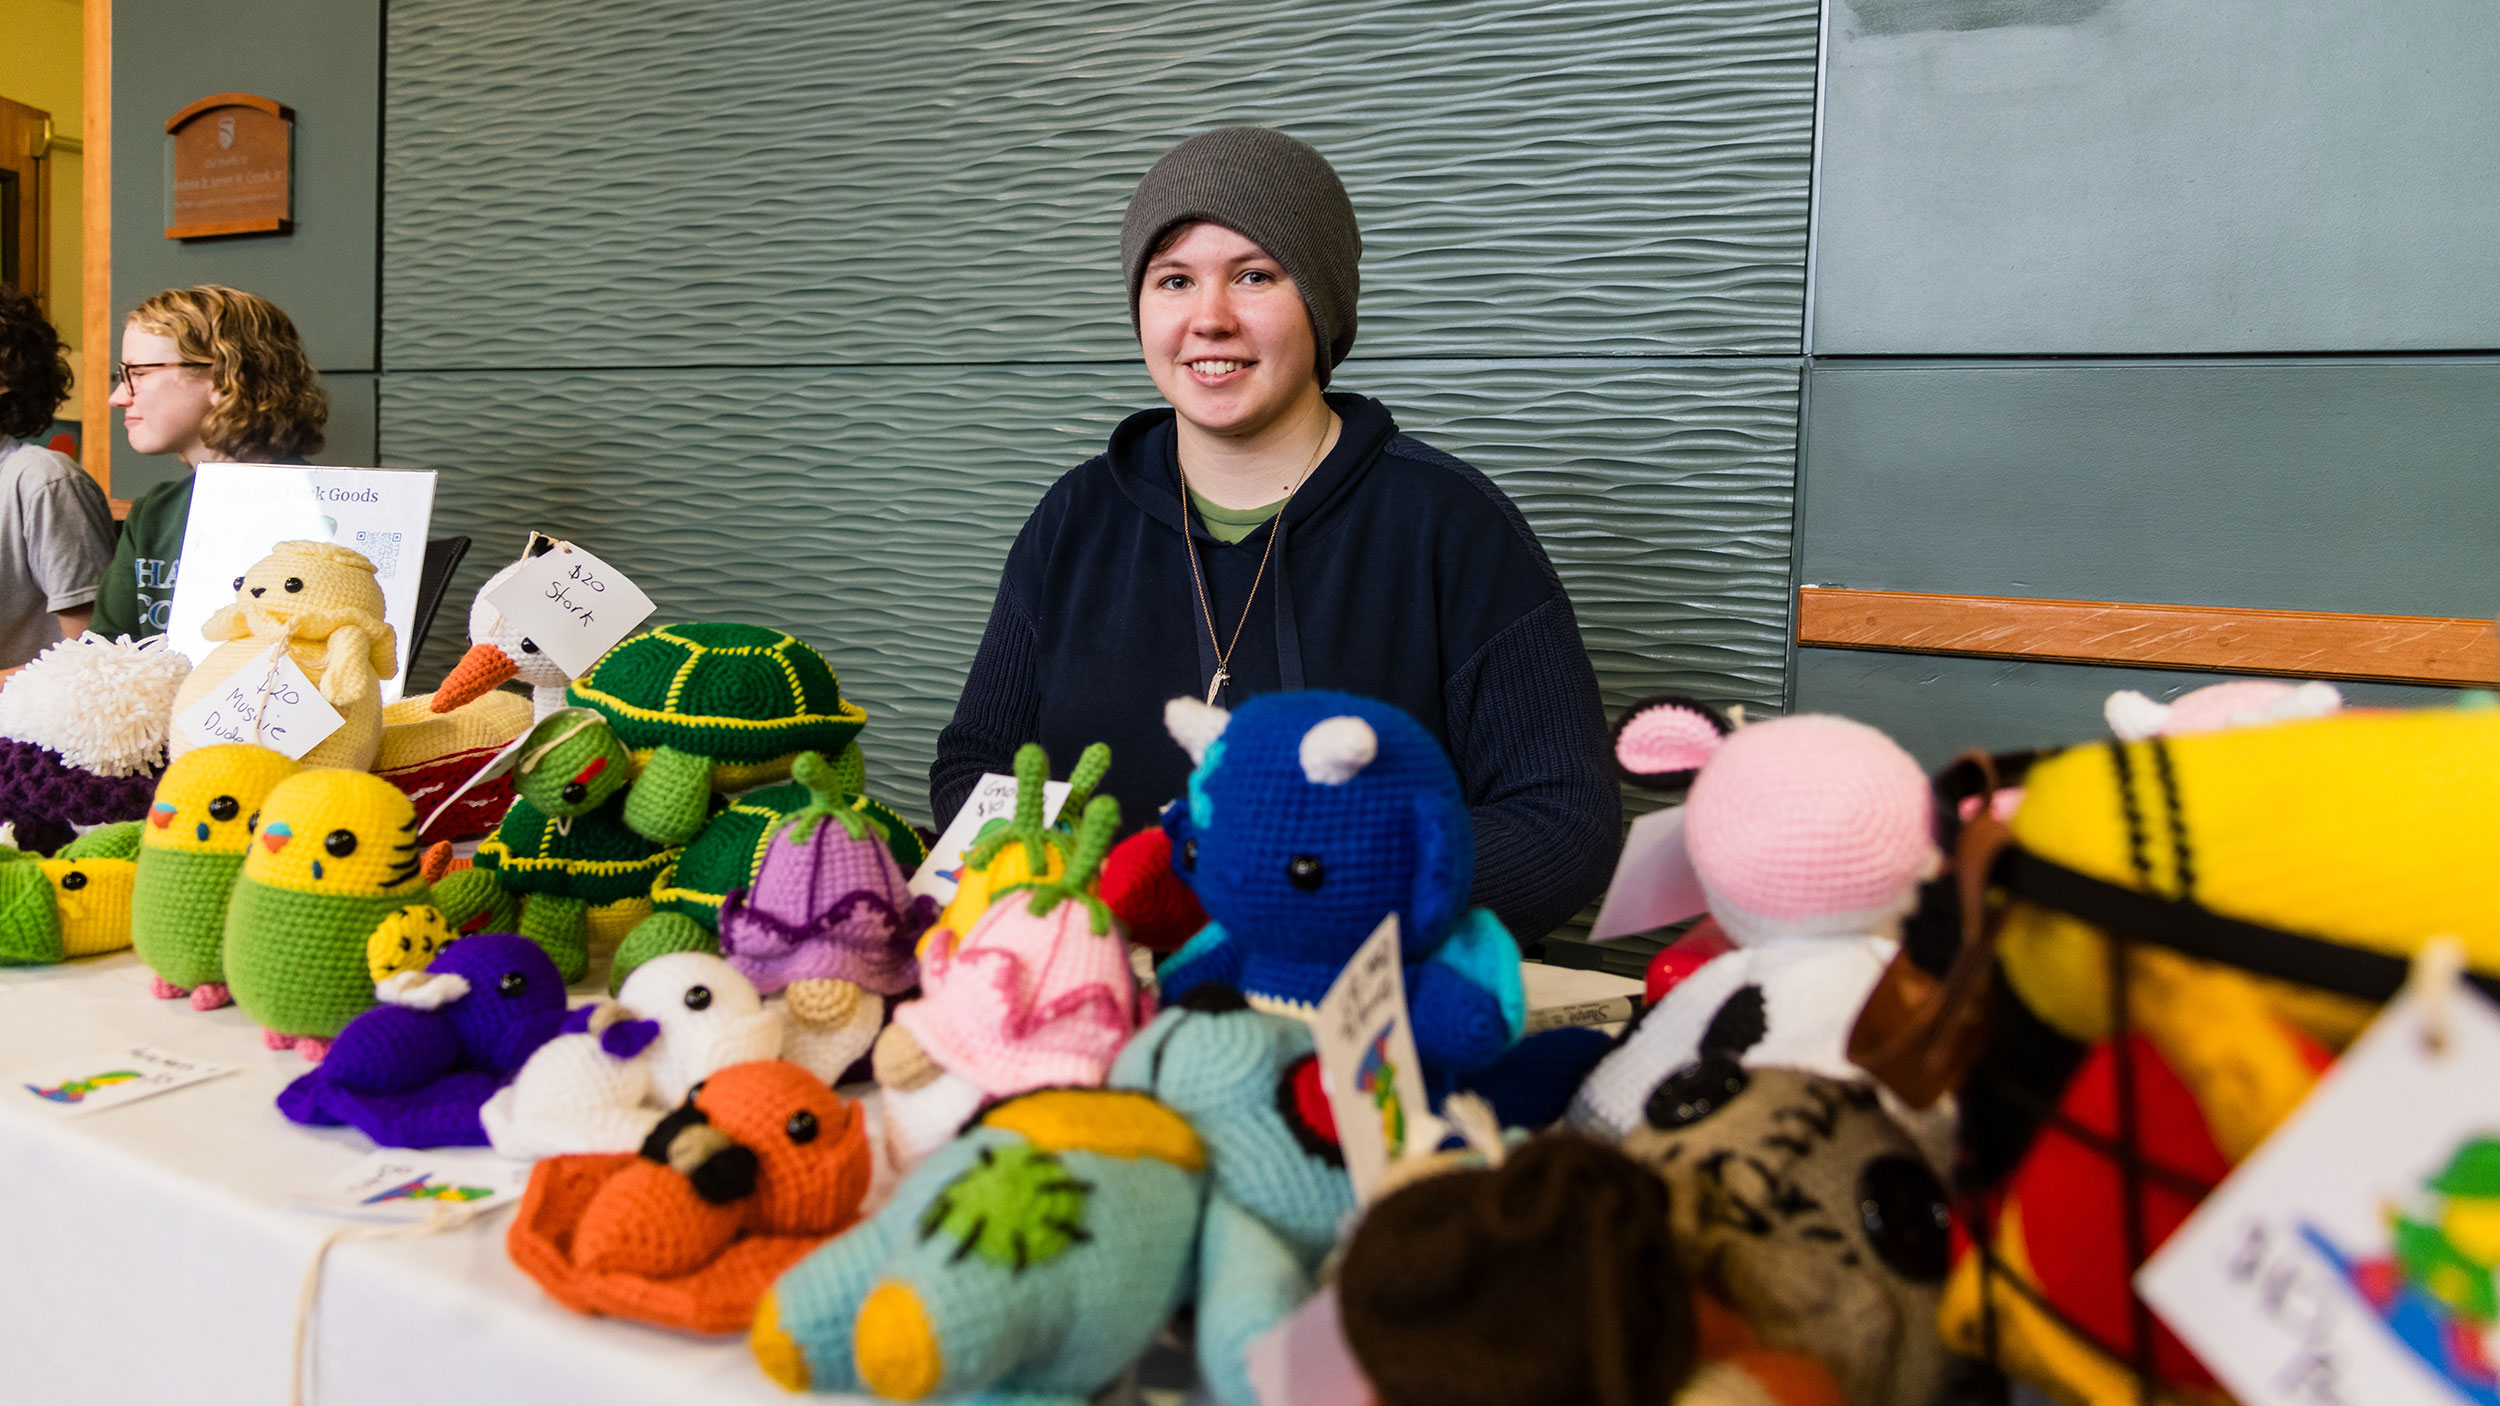 a student sits at a table covered in homemade crocheted plushies that they are selling